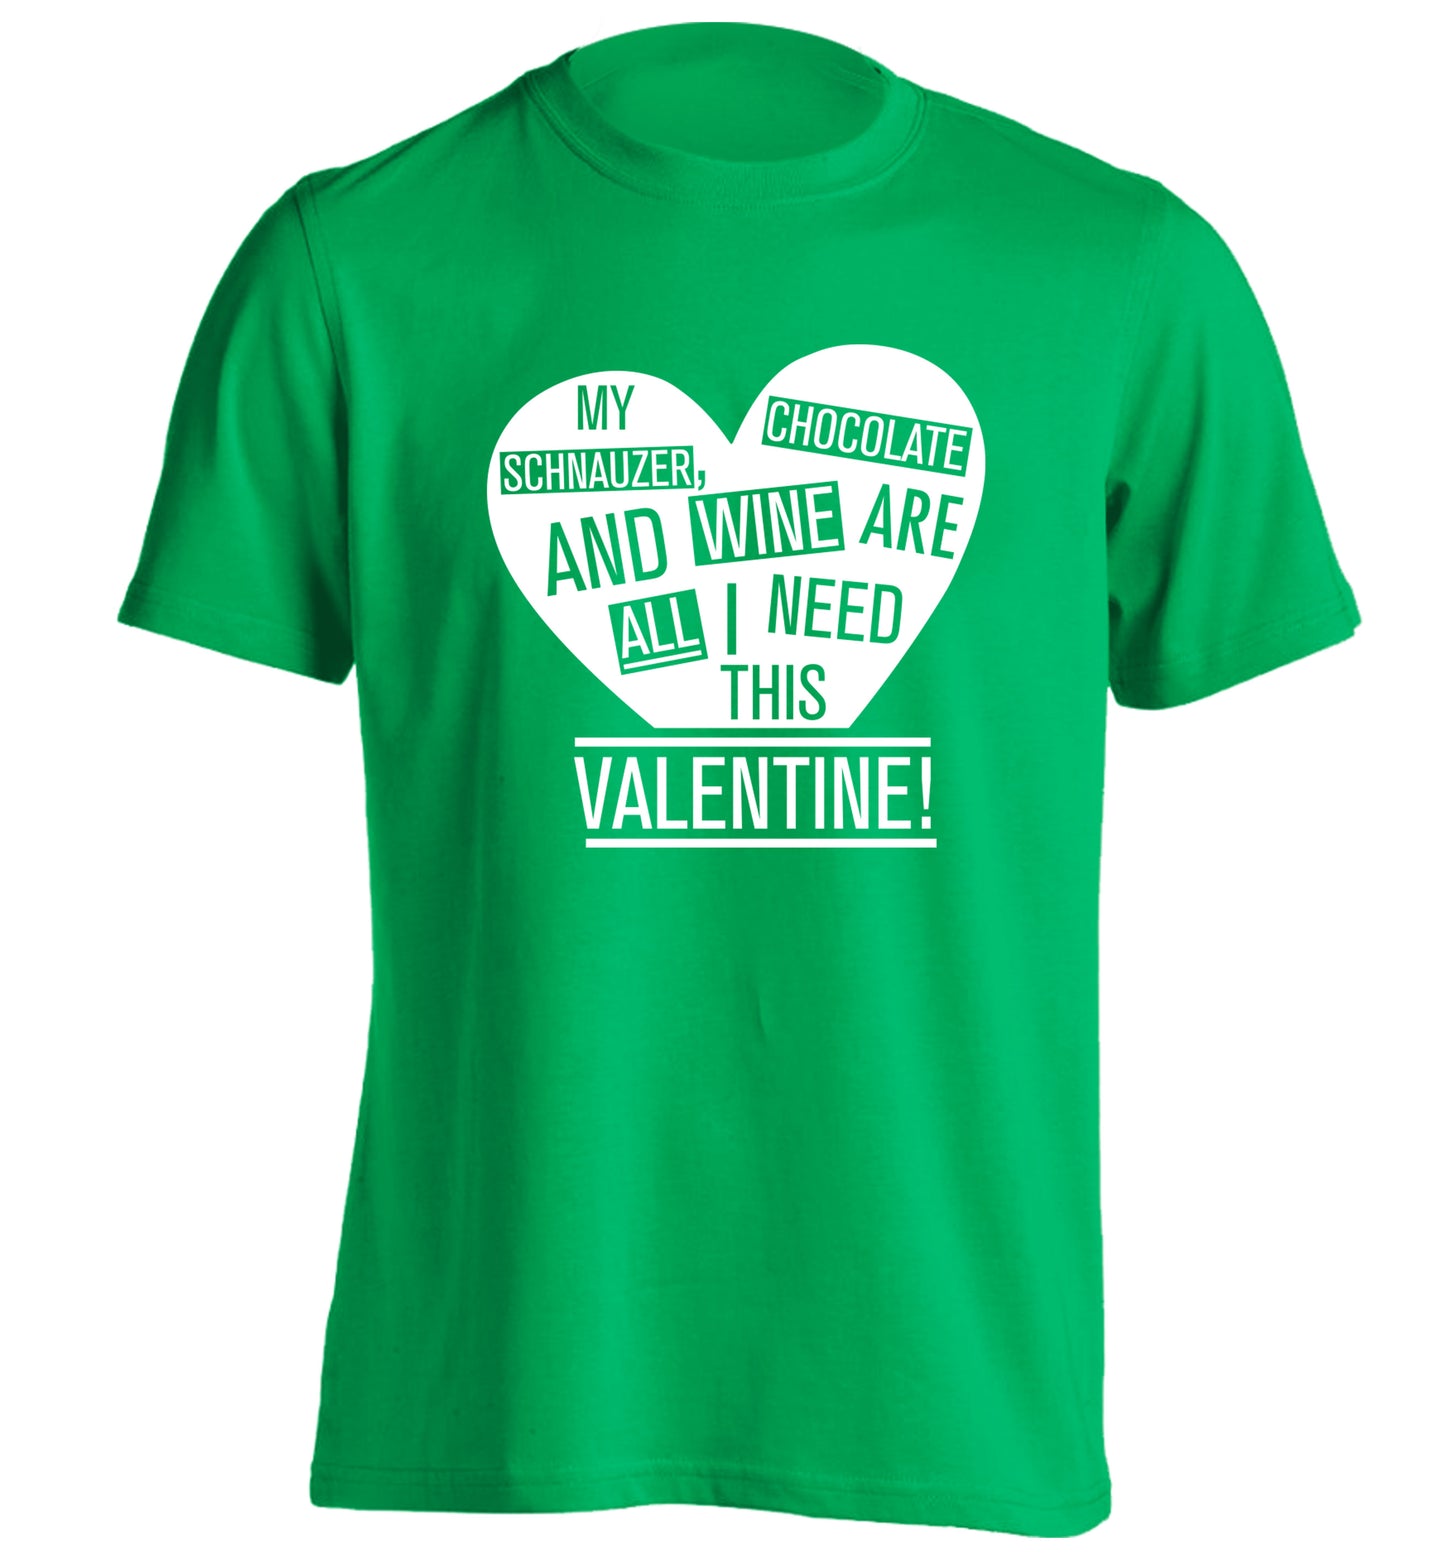 My schnauzer, chocolate and wine are all I need this valentine! adults unisex green Tshirt 2XL